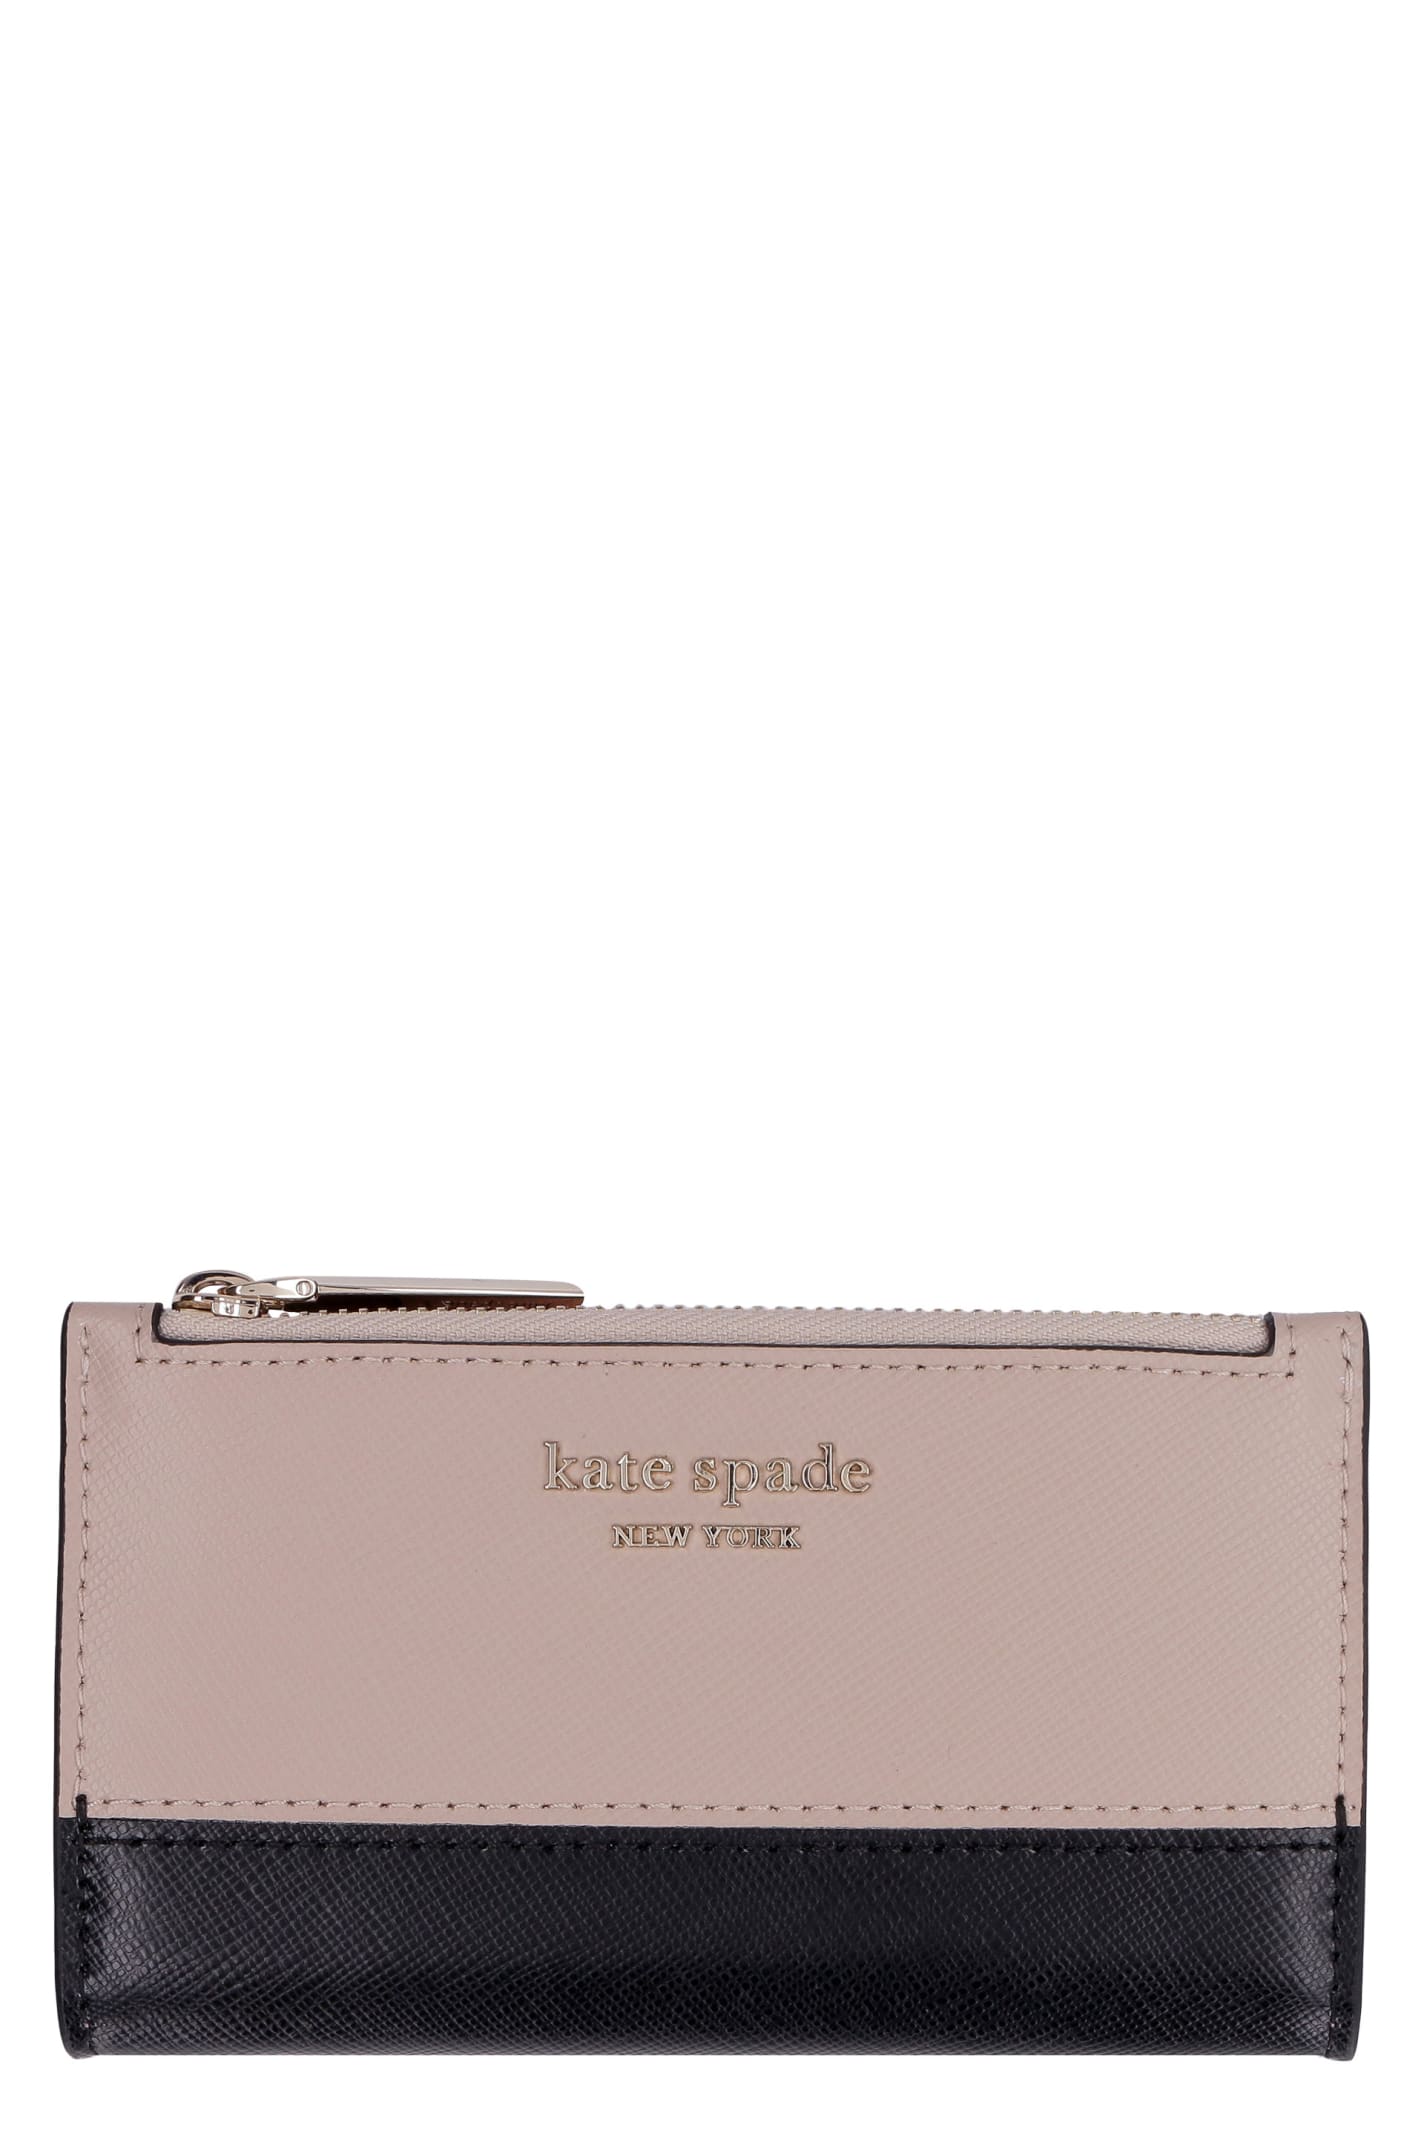 Kate Spade Spencer Saffiano Leather Small Wallet